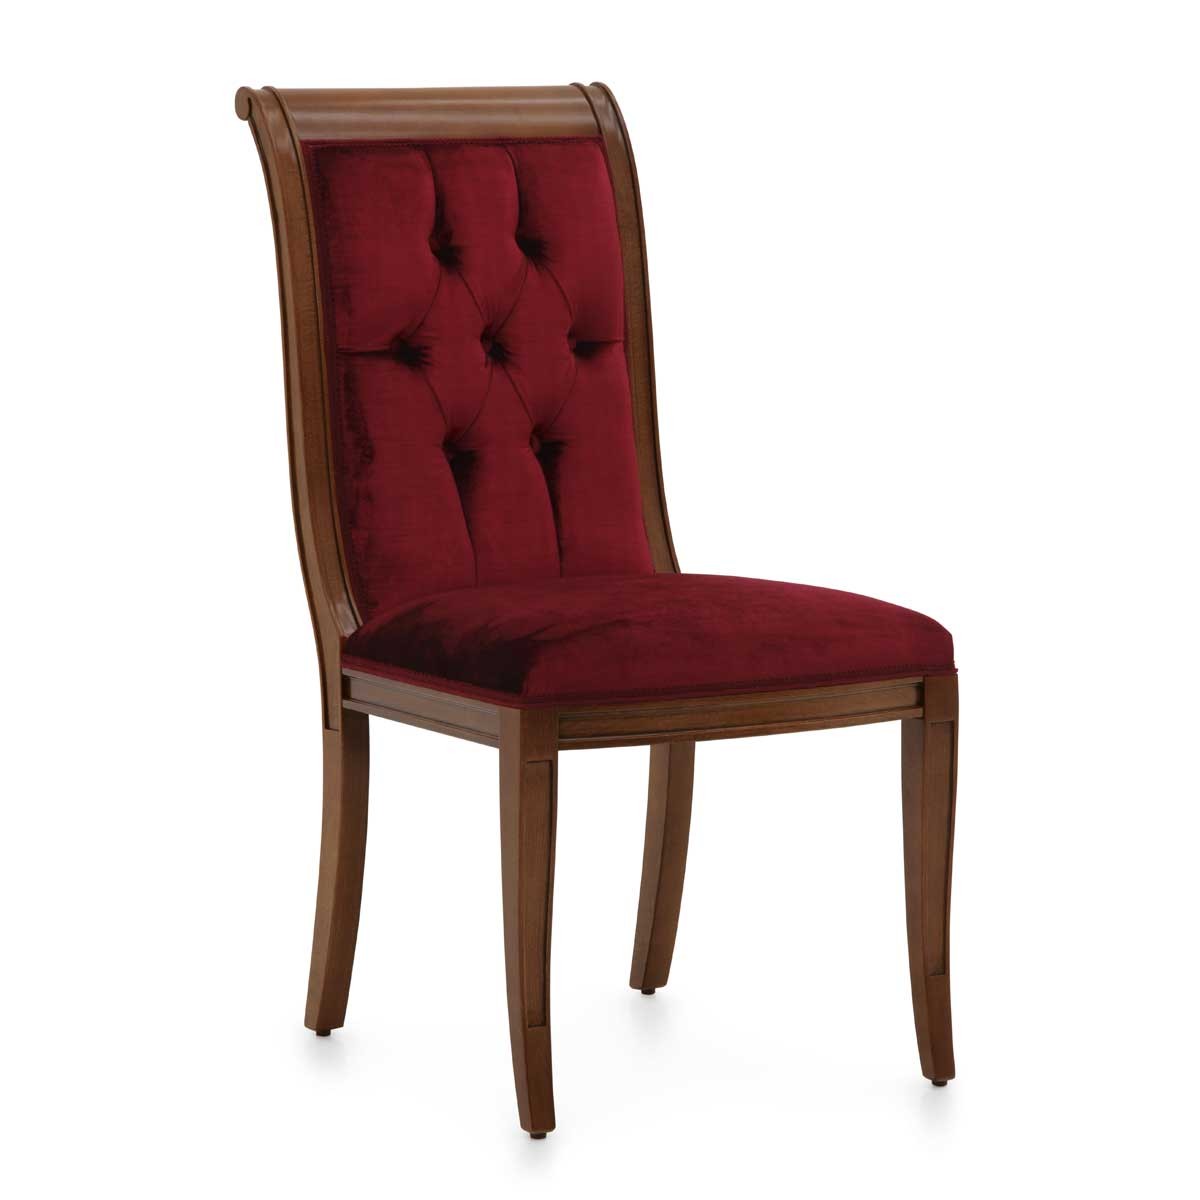 Napoleon red upholstered classic chair TORINO with tufted back by Sevensedie